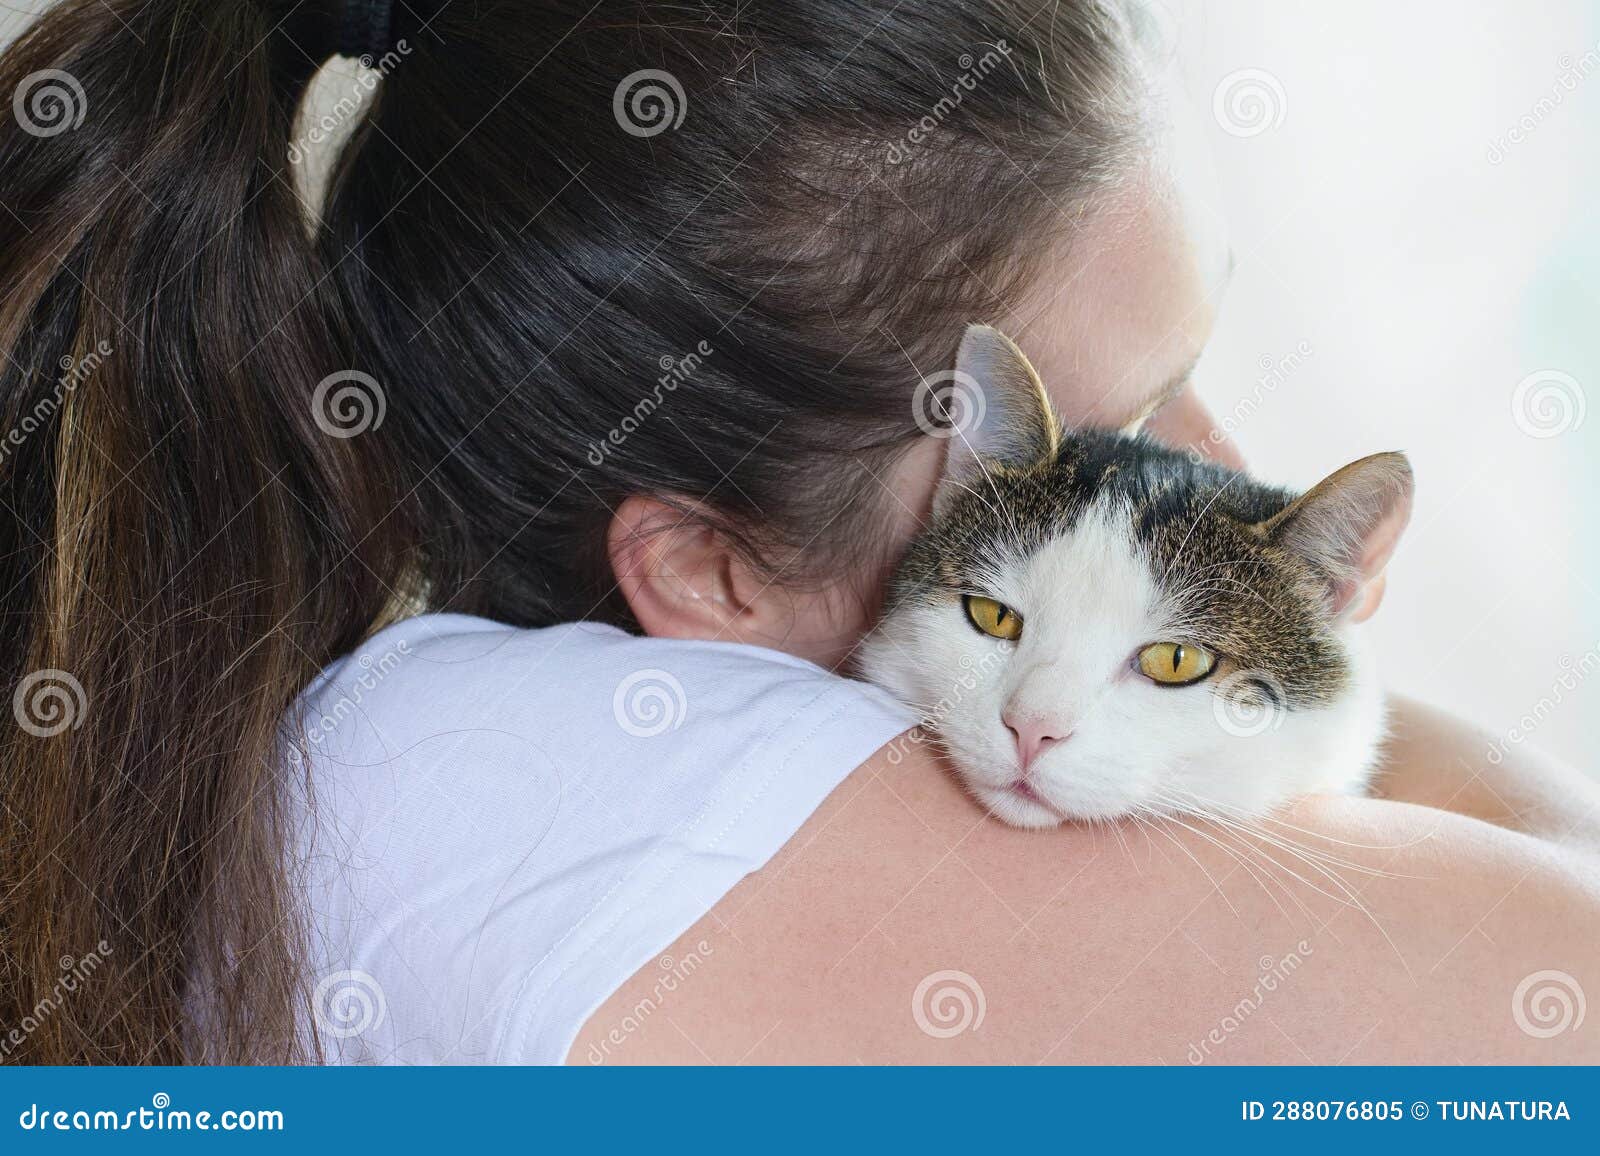 woman tenderly caressing cat, holding it in the arms. felinotherapy concept